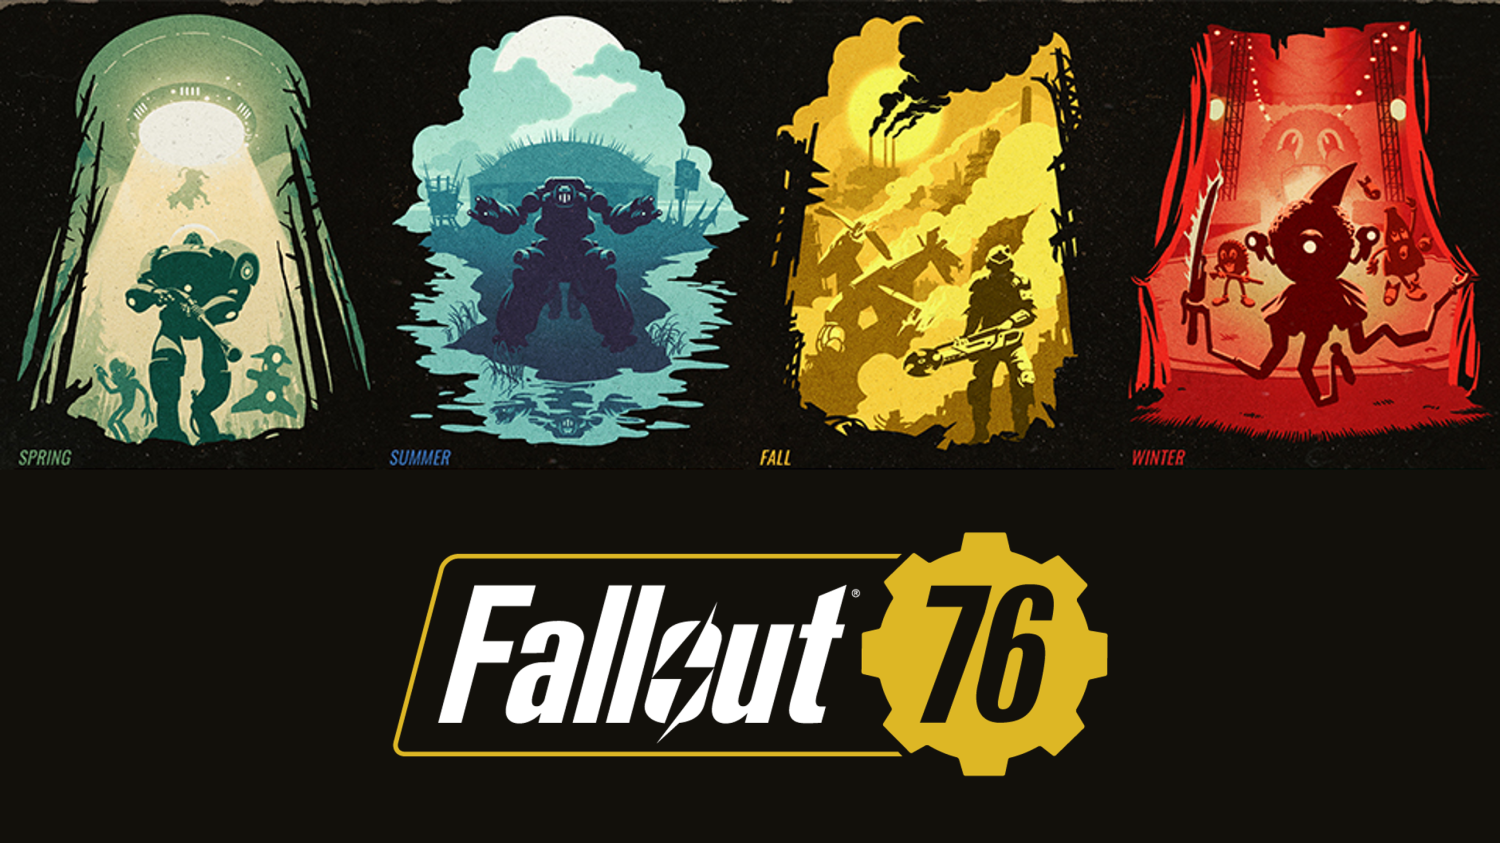 Fallout 76's 2022 roadmap New seasons, expeditions and more